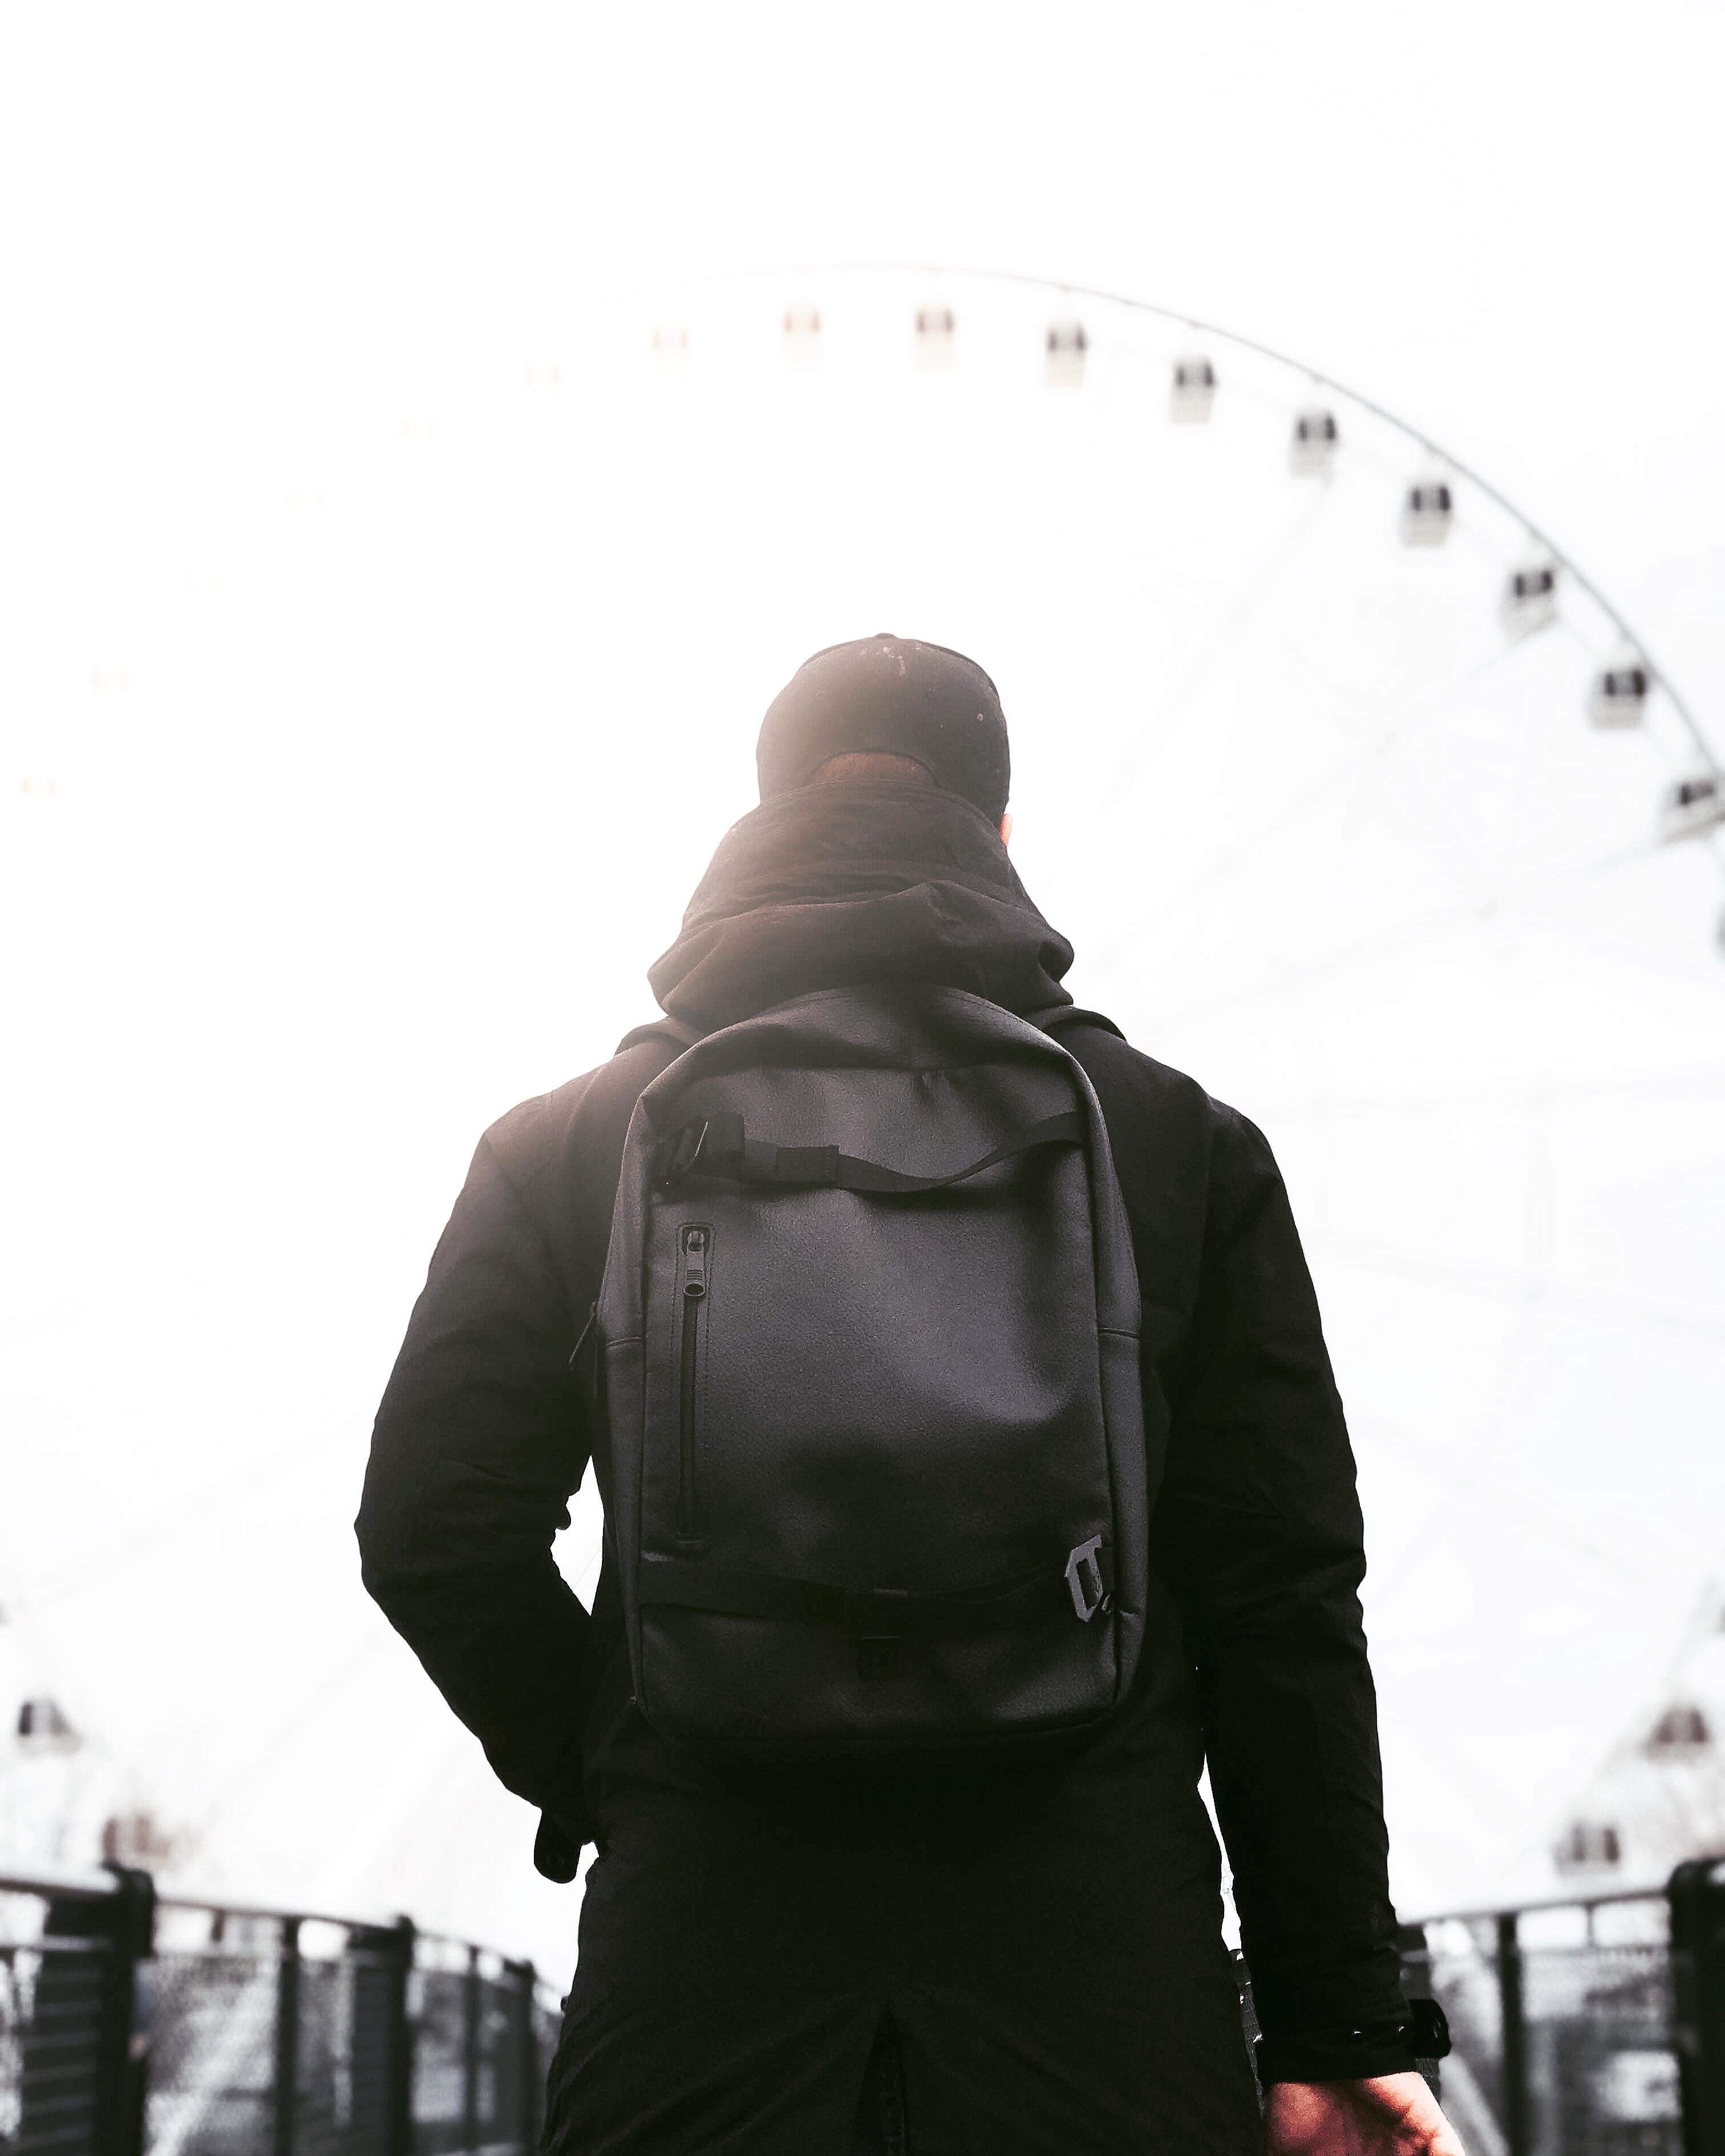 black, miscellanea, miscellaneous, style, human, person, backpack, rucksack, jacket